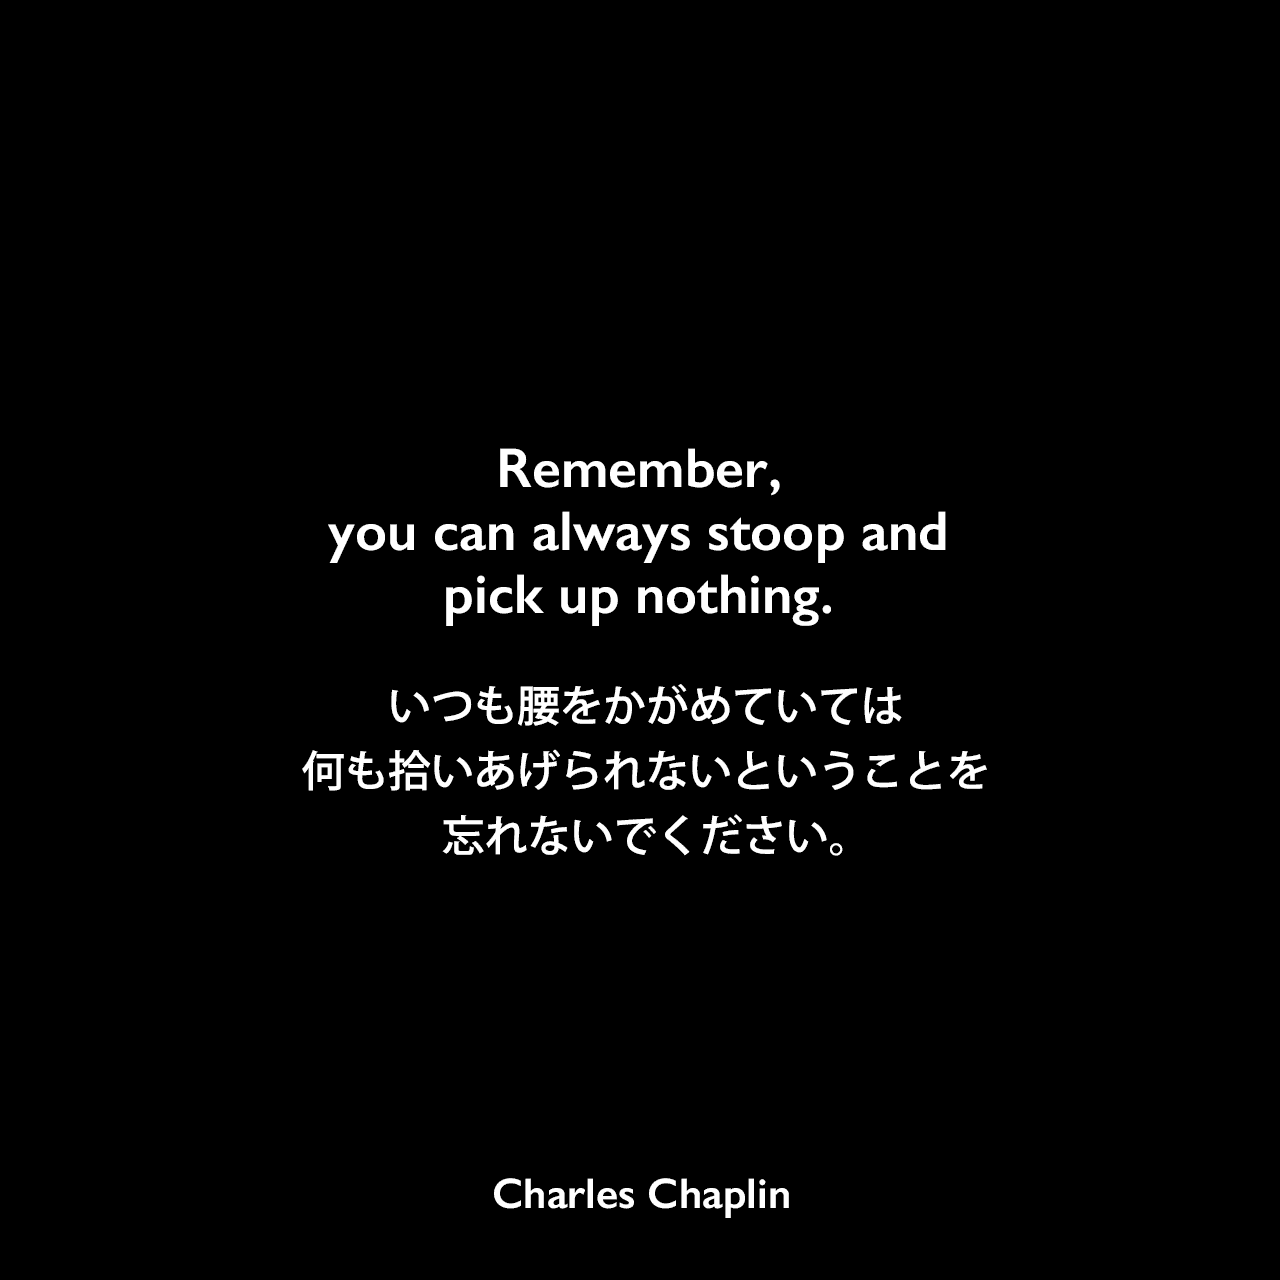 Remember, you can always stoop and pick up nothing.いつも腰をかがめていては、何も拾いあげられないということを忘れないでください。Charles Chaplin